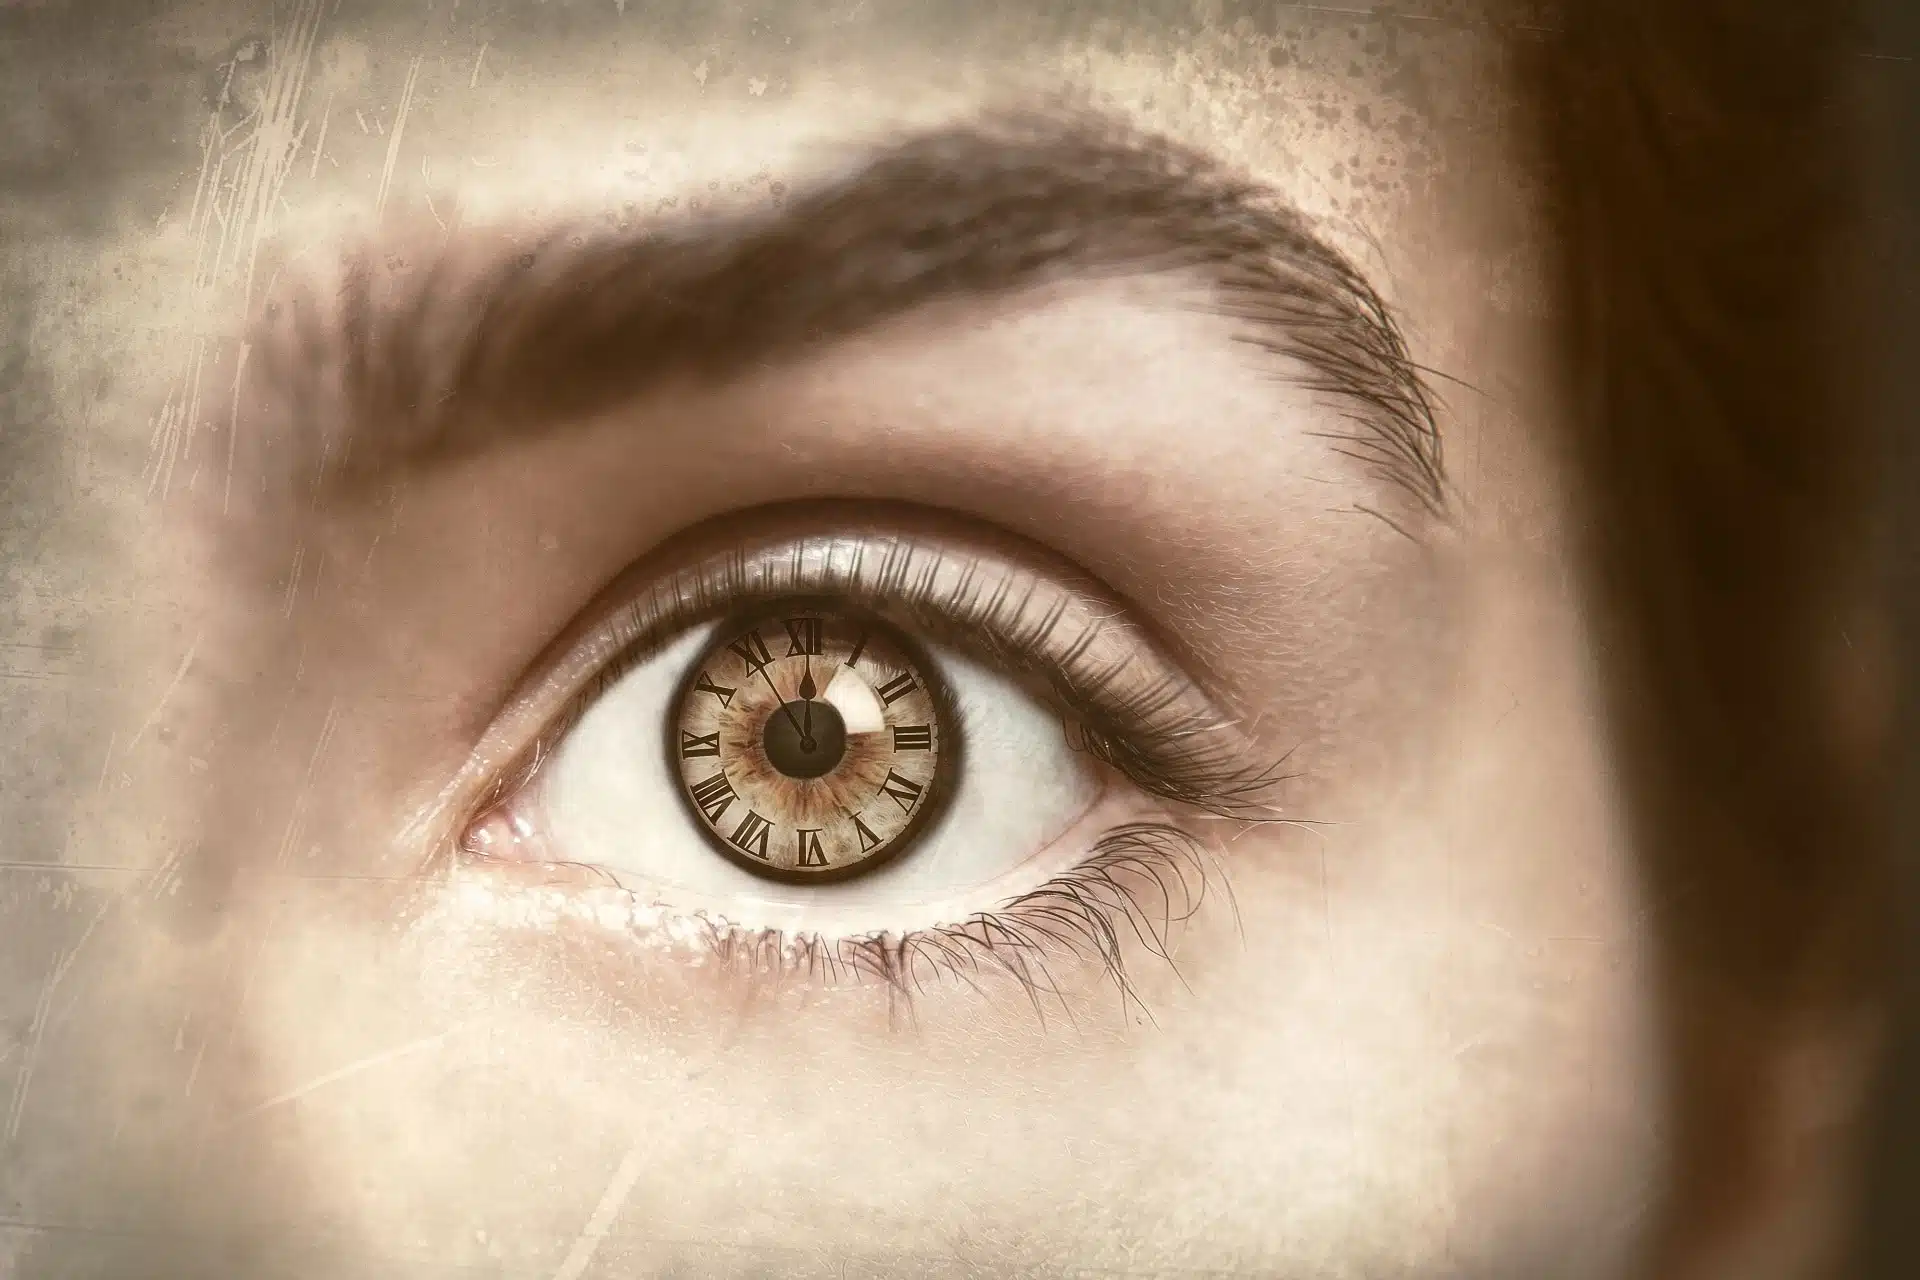 image of a clock in a woman's eye